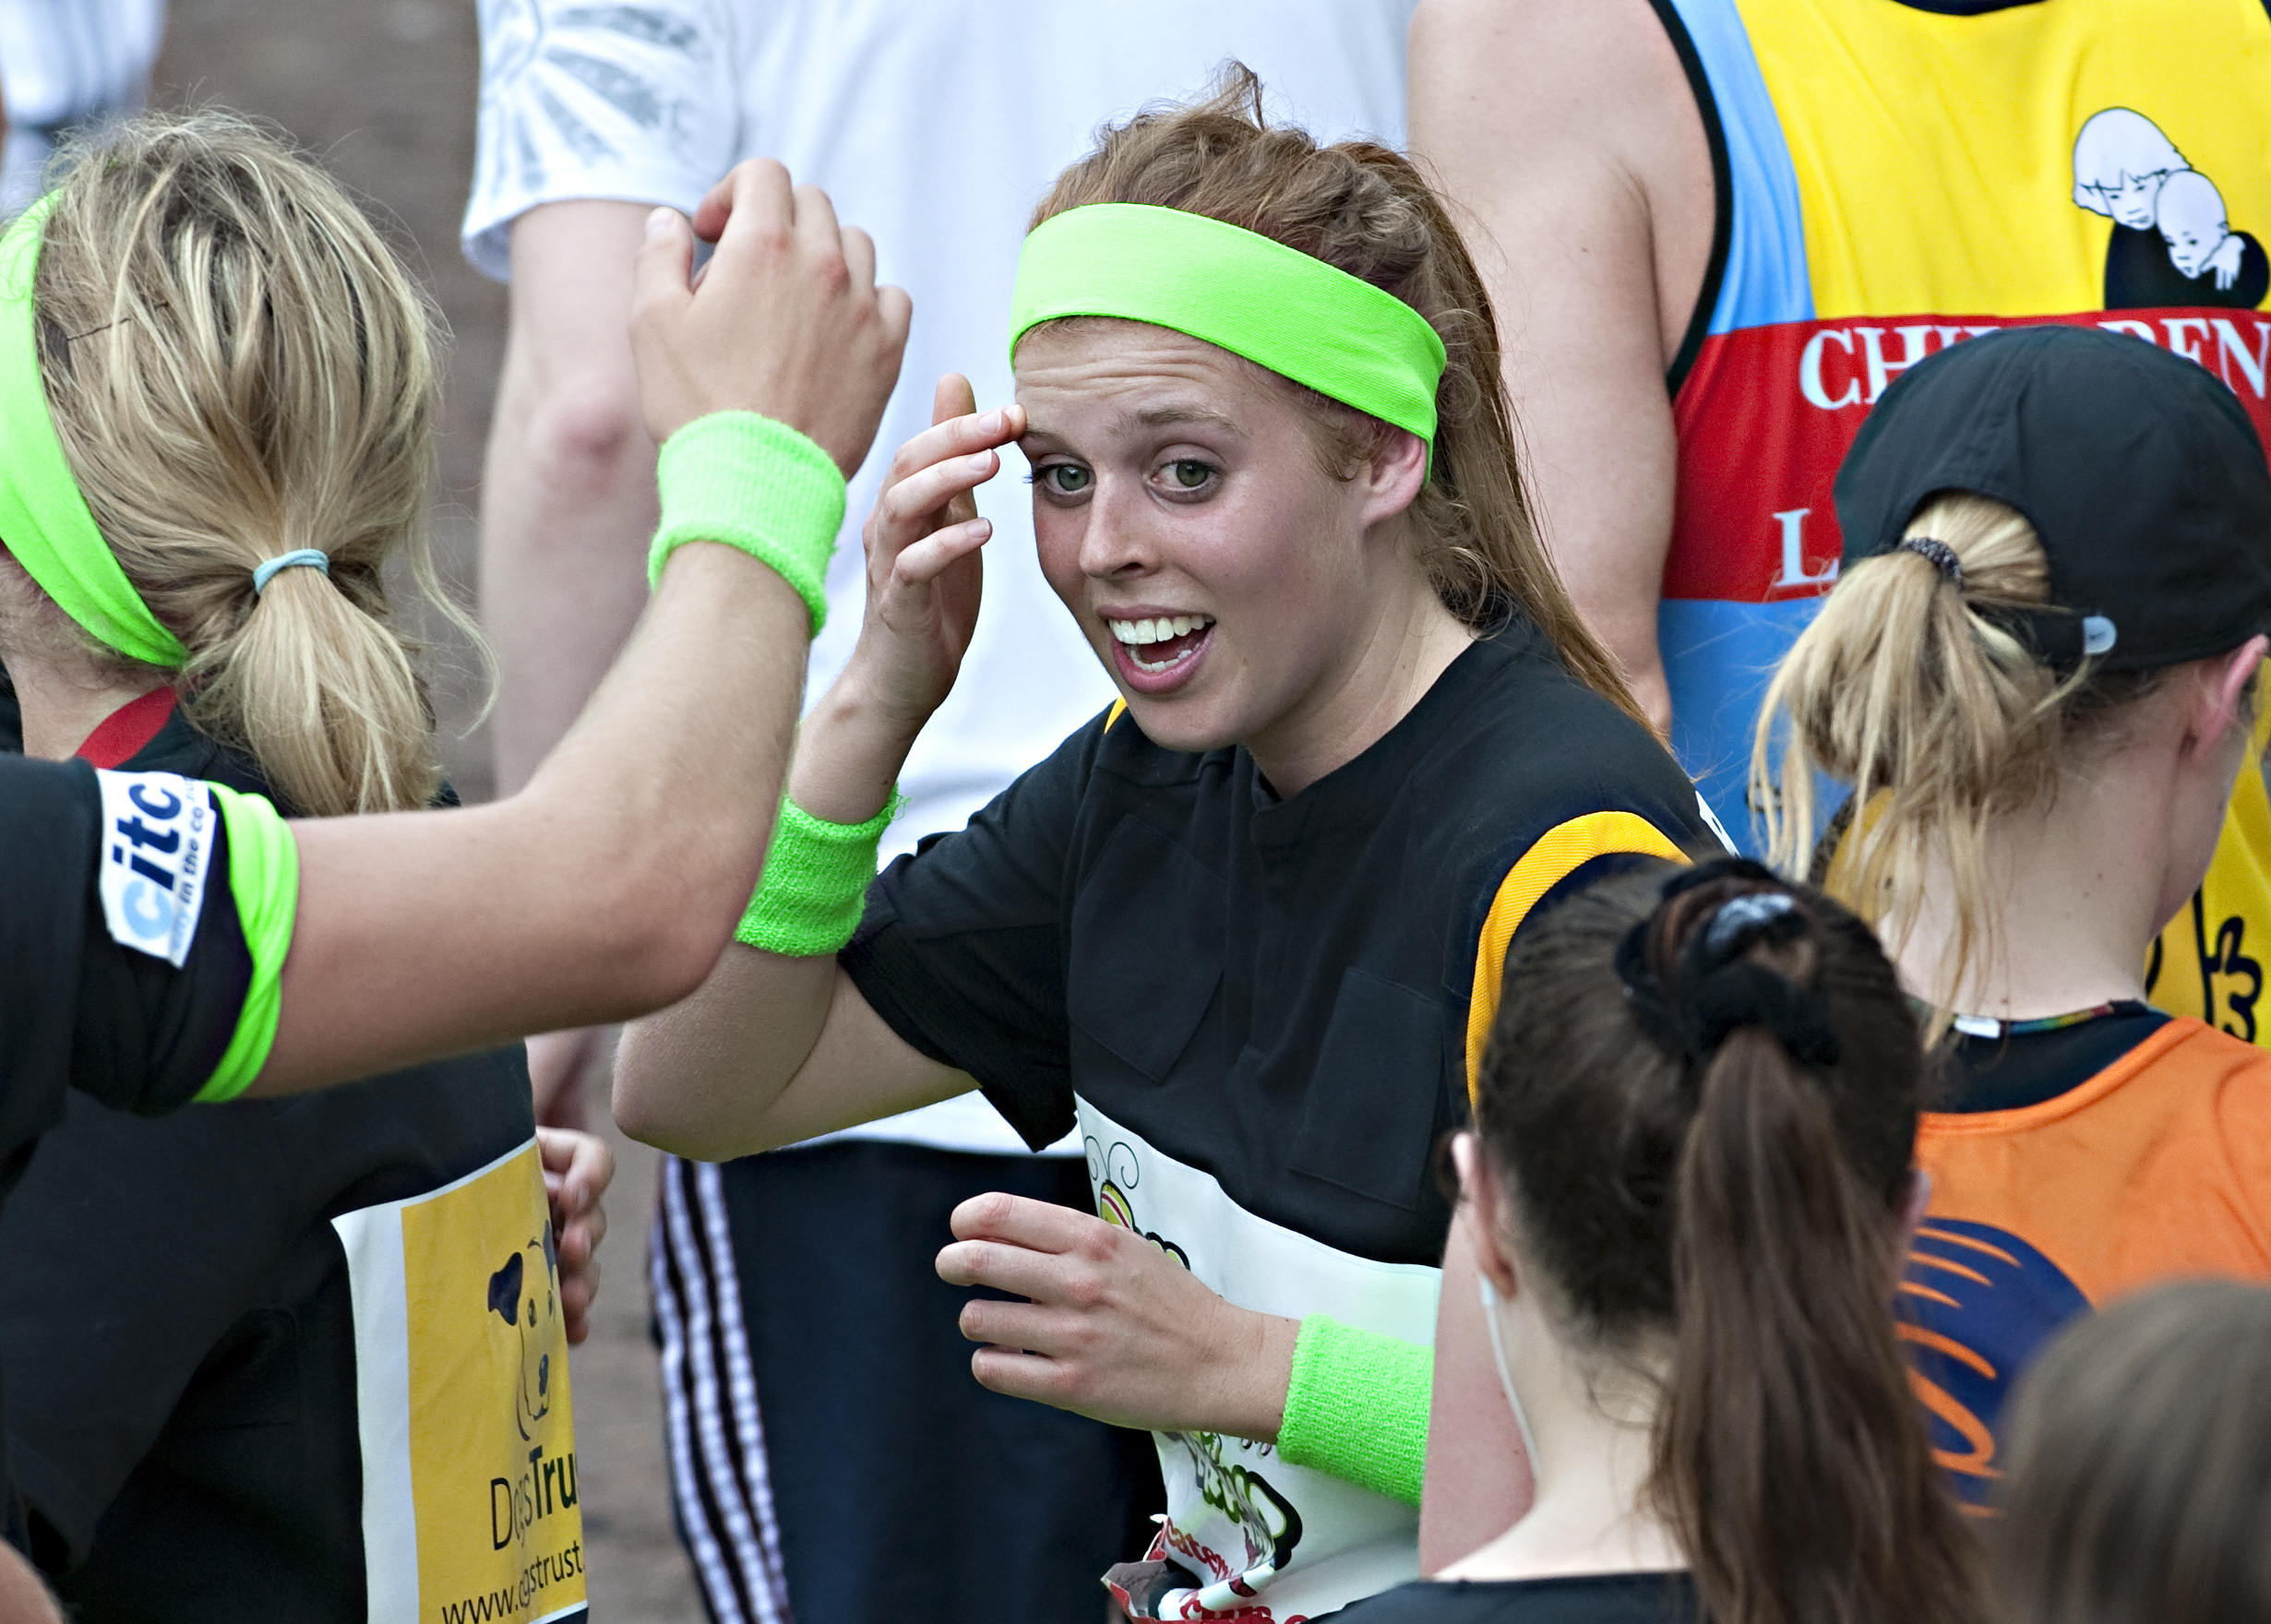 Princess Beatrice at the 2010 Virgin London Marathon in London, England in 2010. | Source: Getty Images